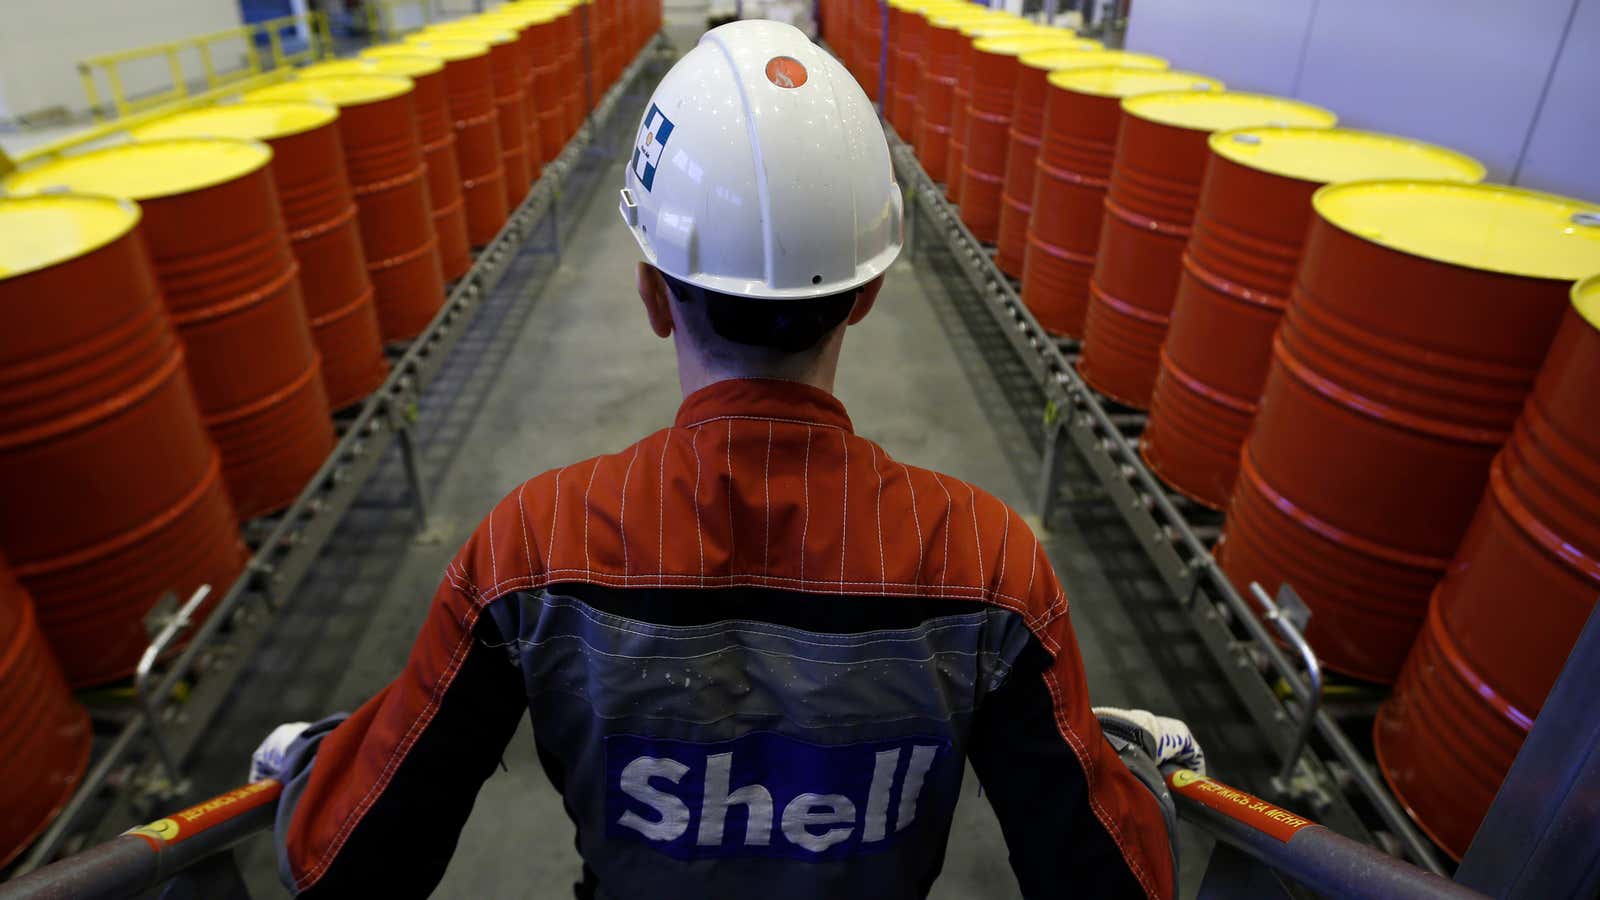 Climate lawyers are suing Shell's directors personally over the oil giant's emissions